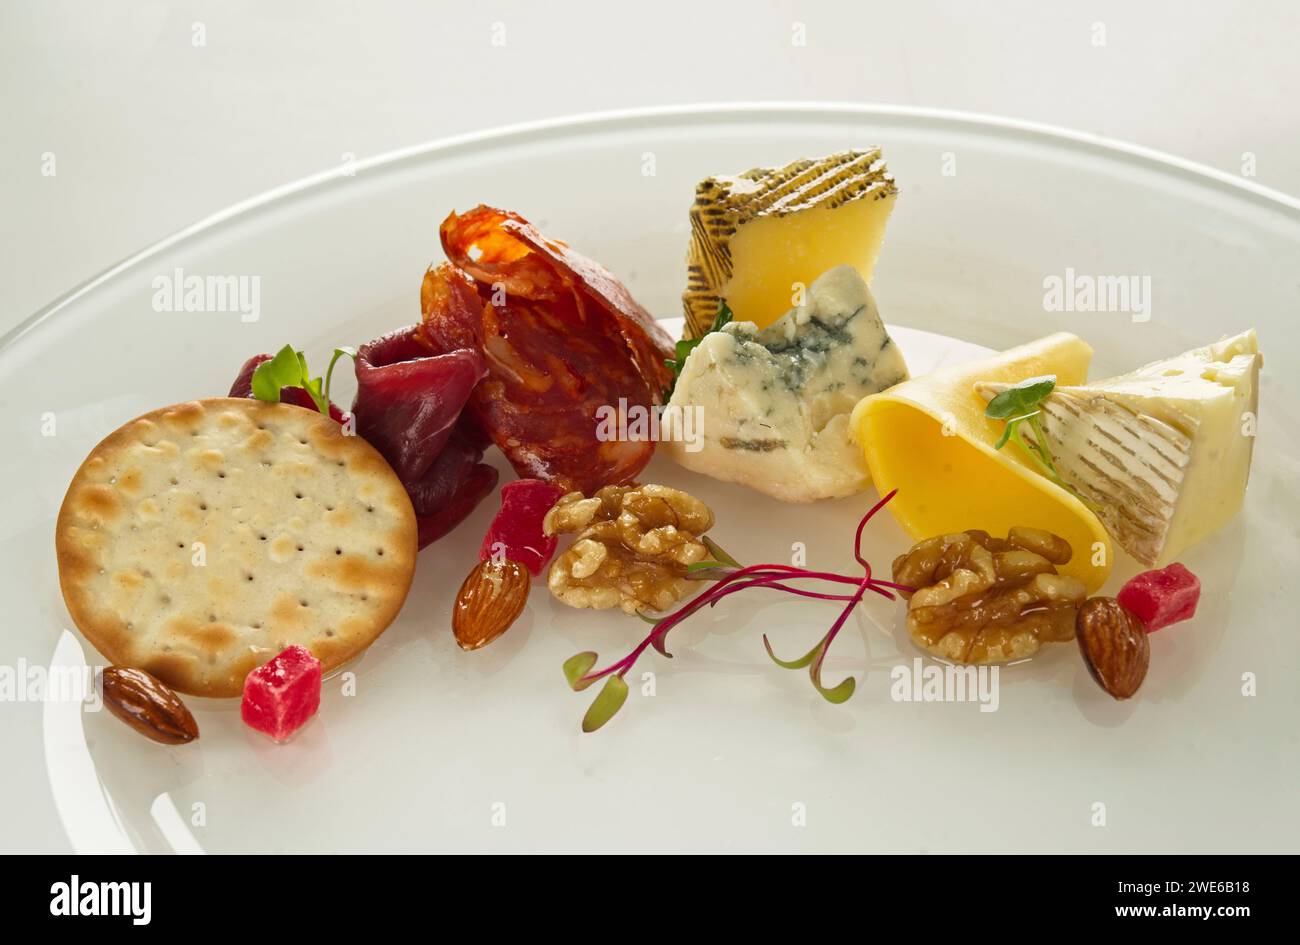 Cheese platter with roast beef, salami, nuts and crackers Stock Photo